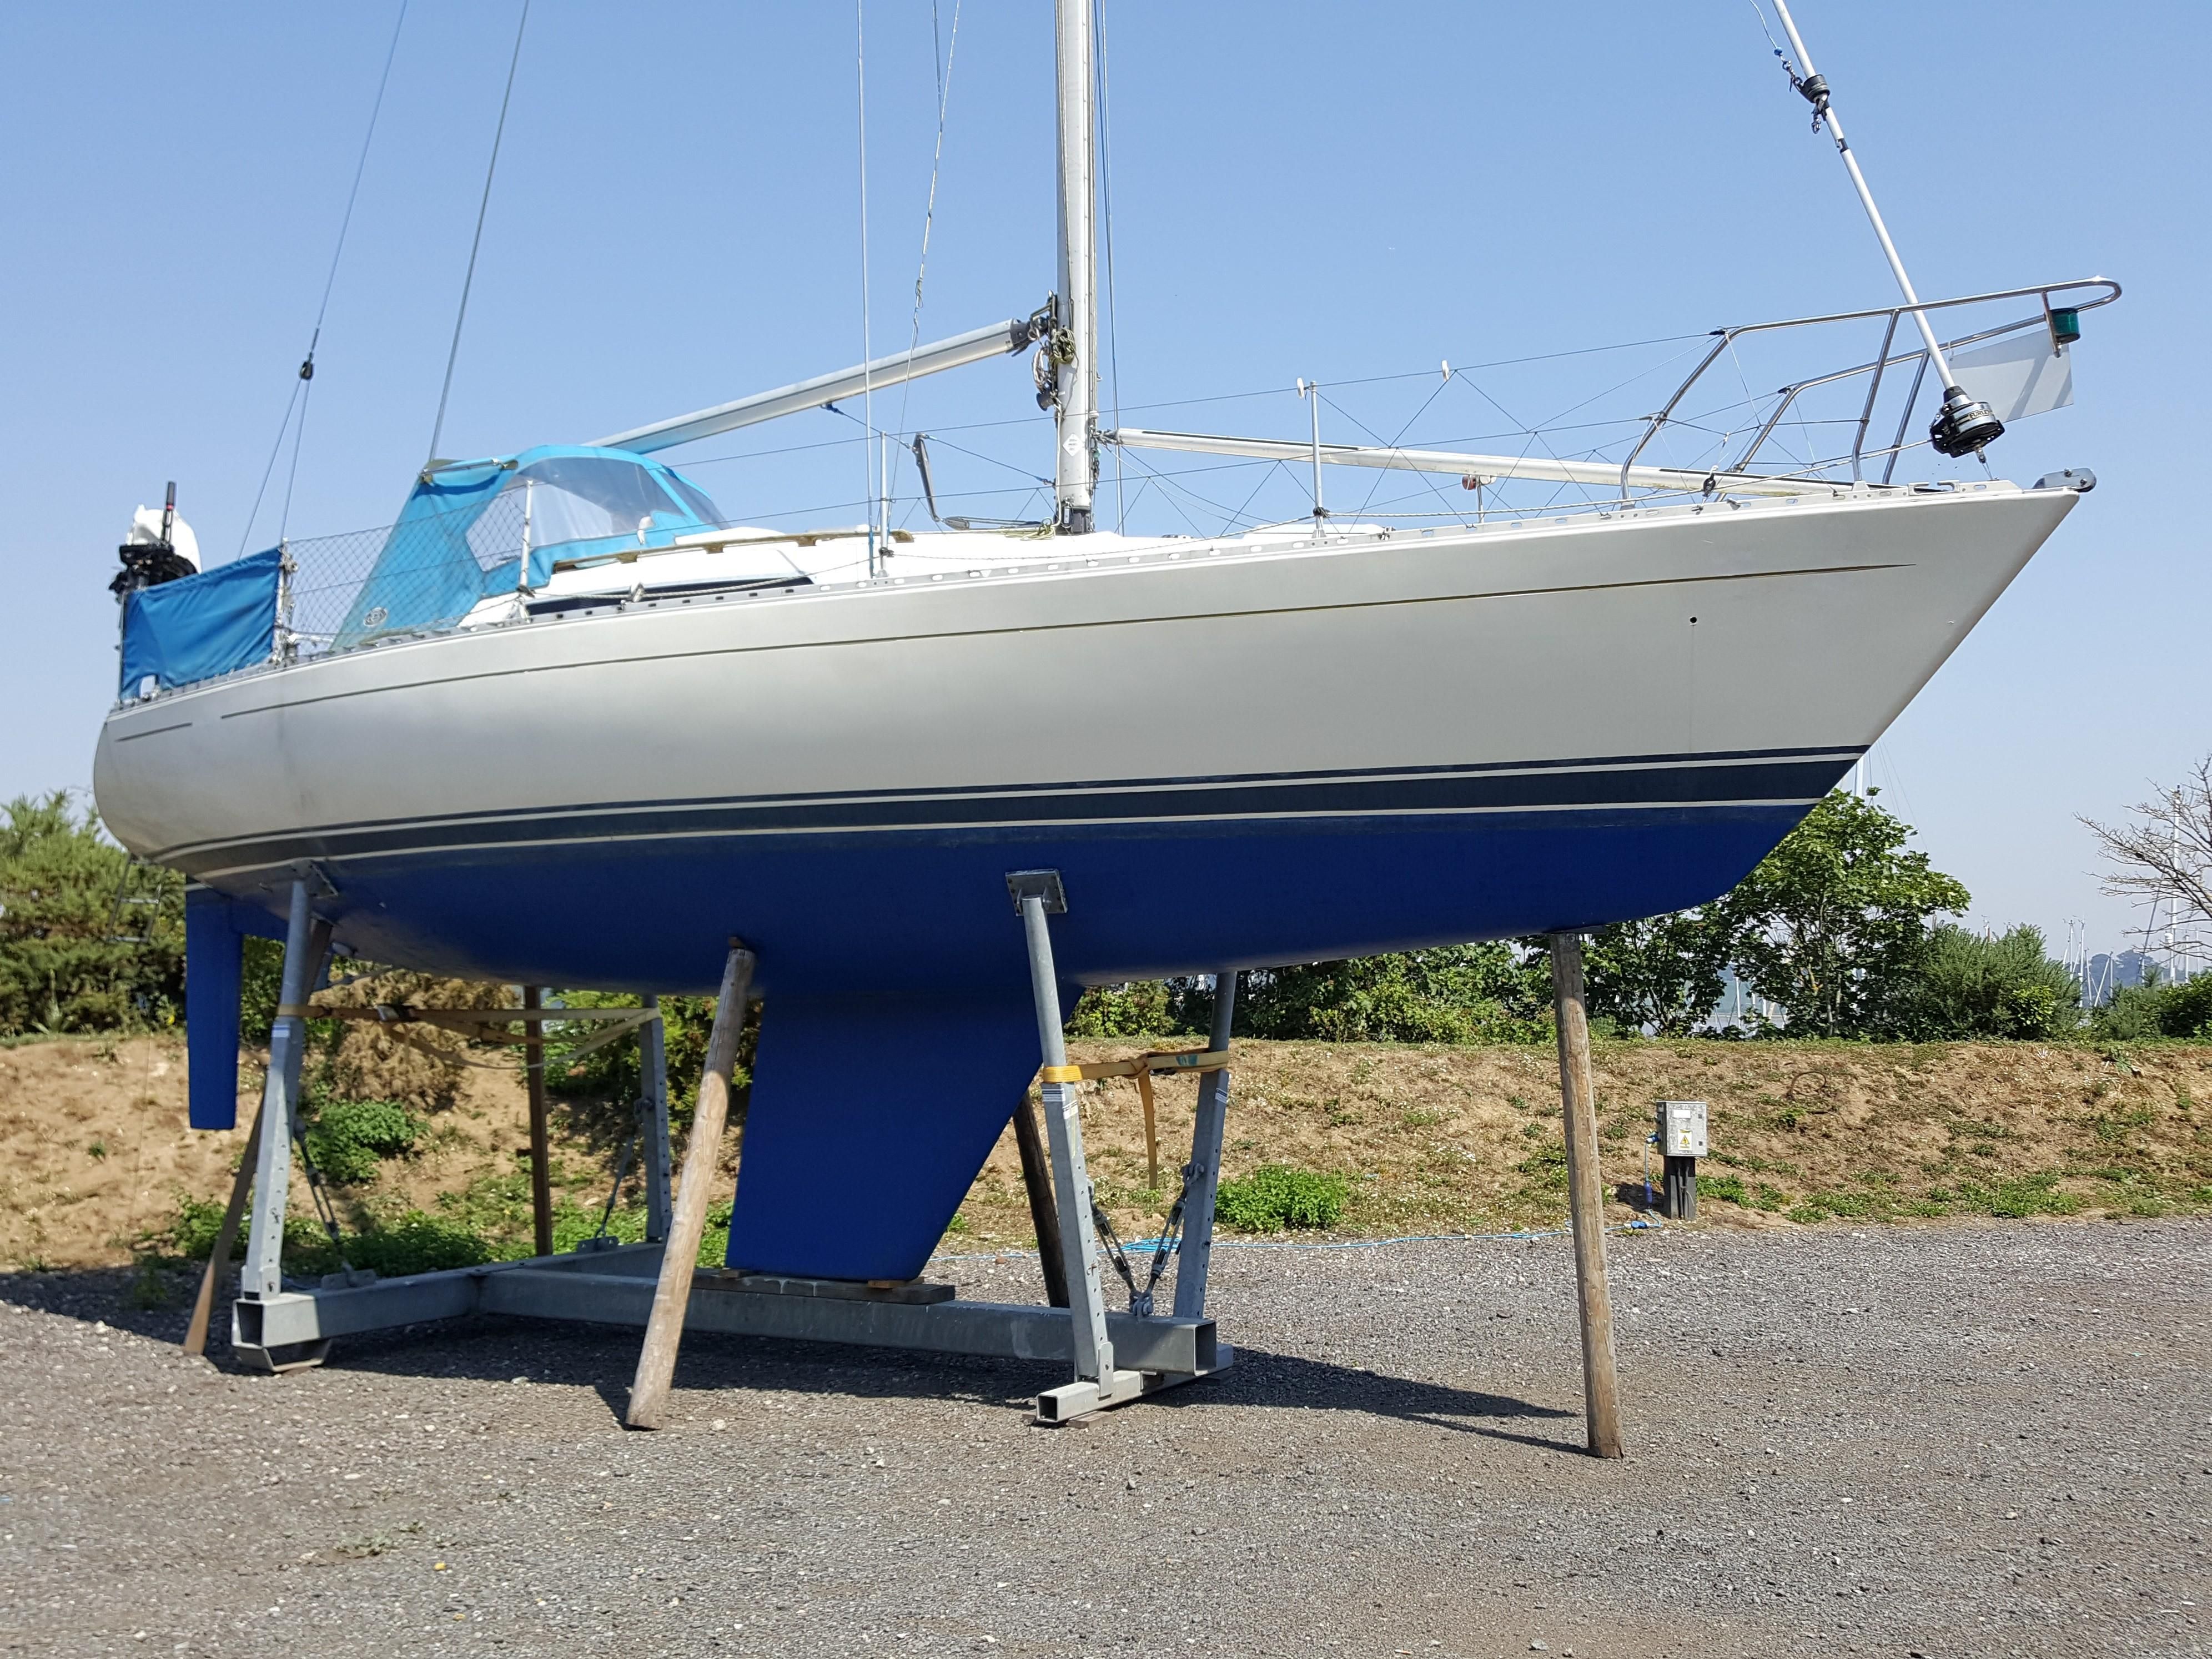 sigma 33 yacht for sale uk